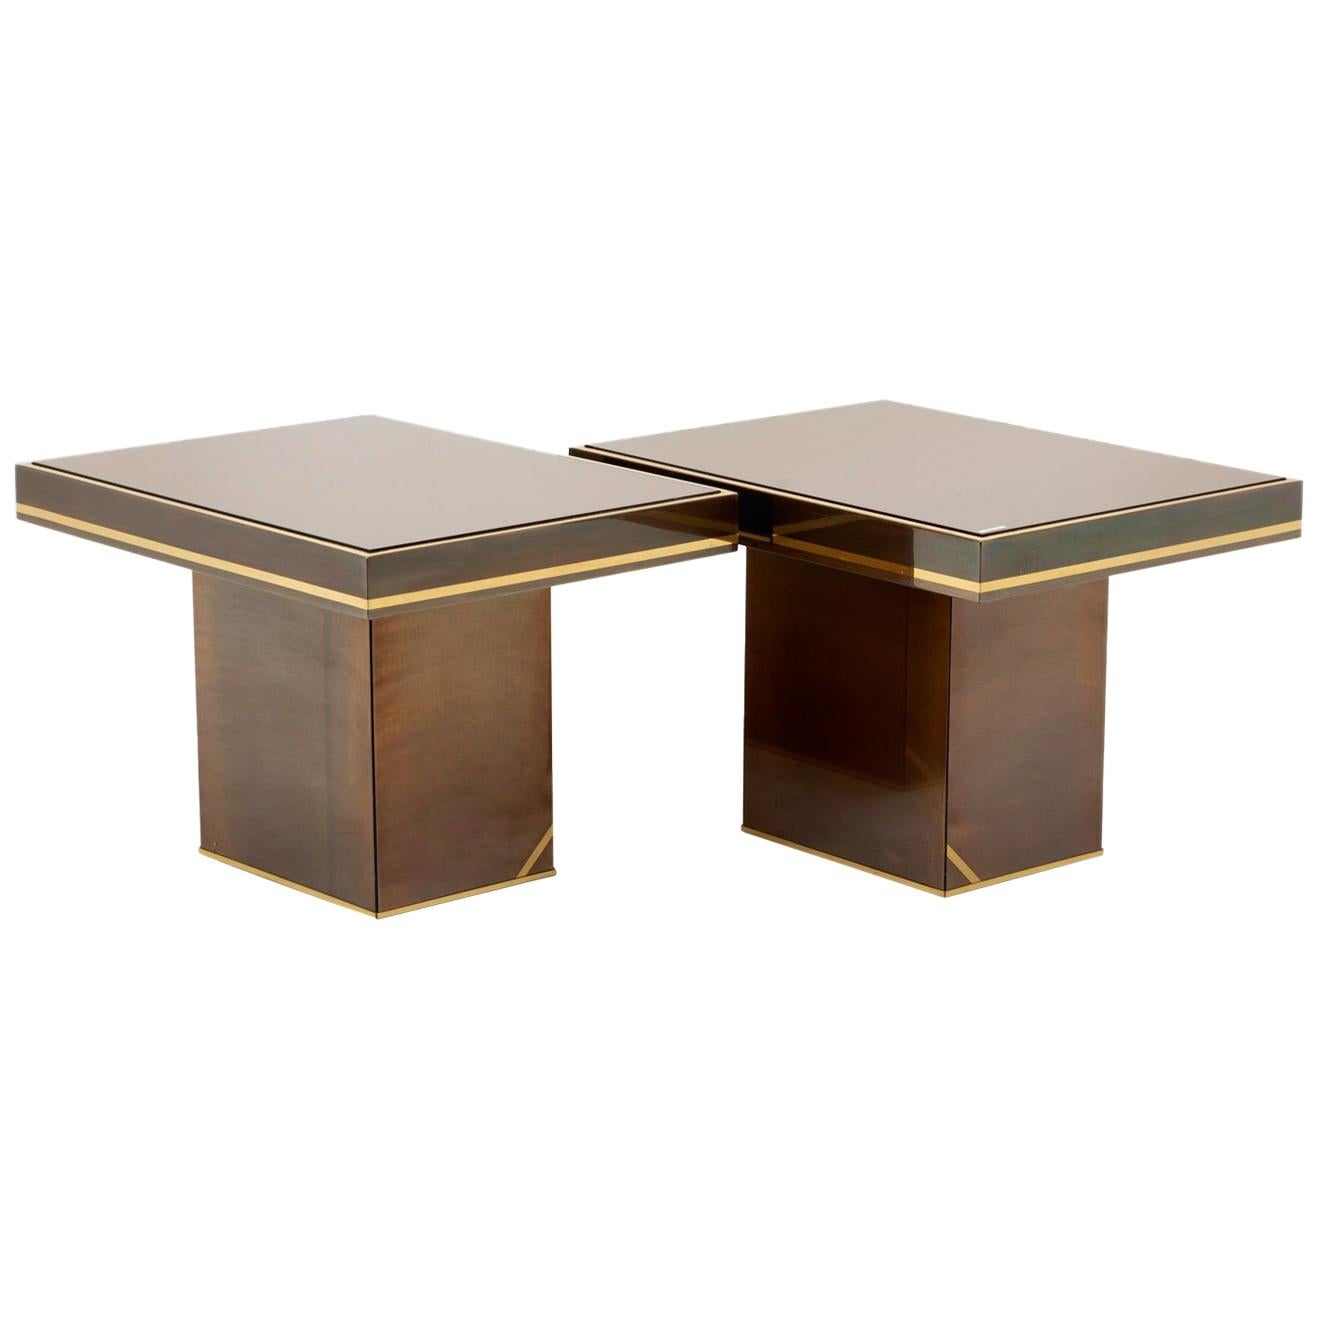 Willy Rizzo, Pair of End Tables in Coppered Mirrors, 1980s